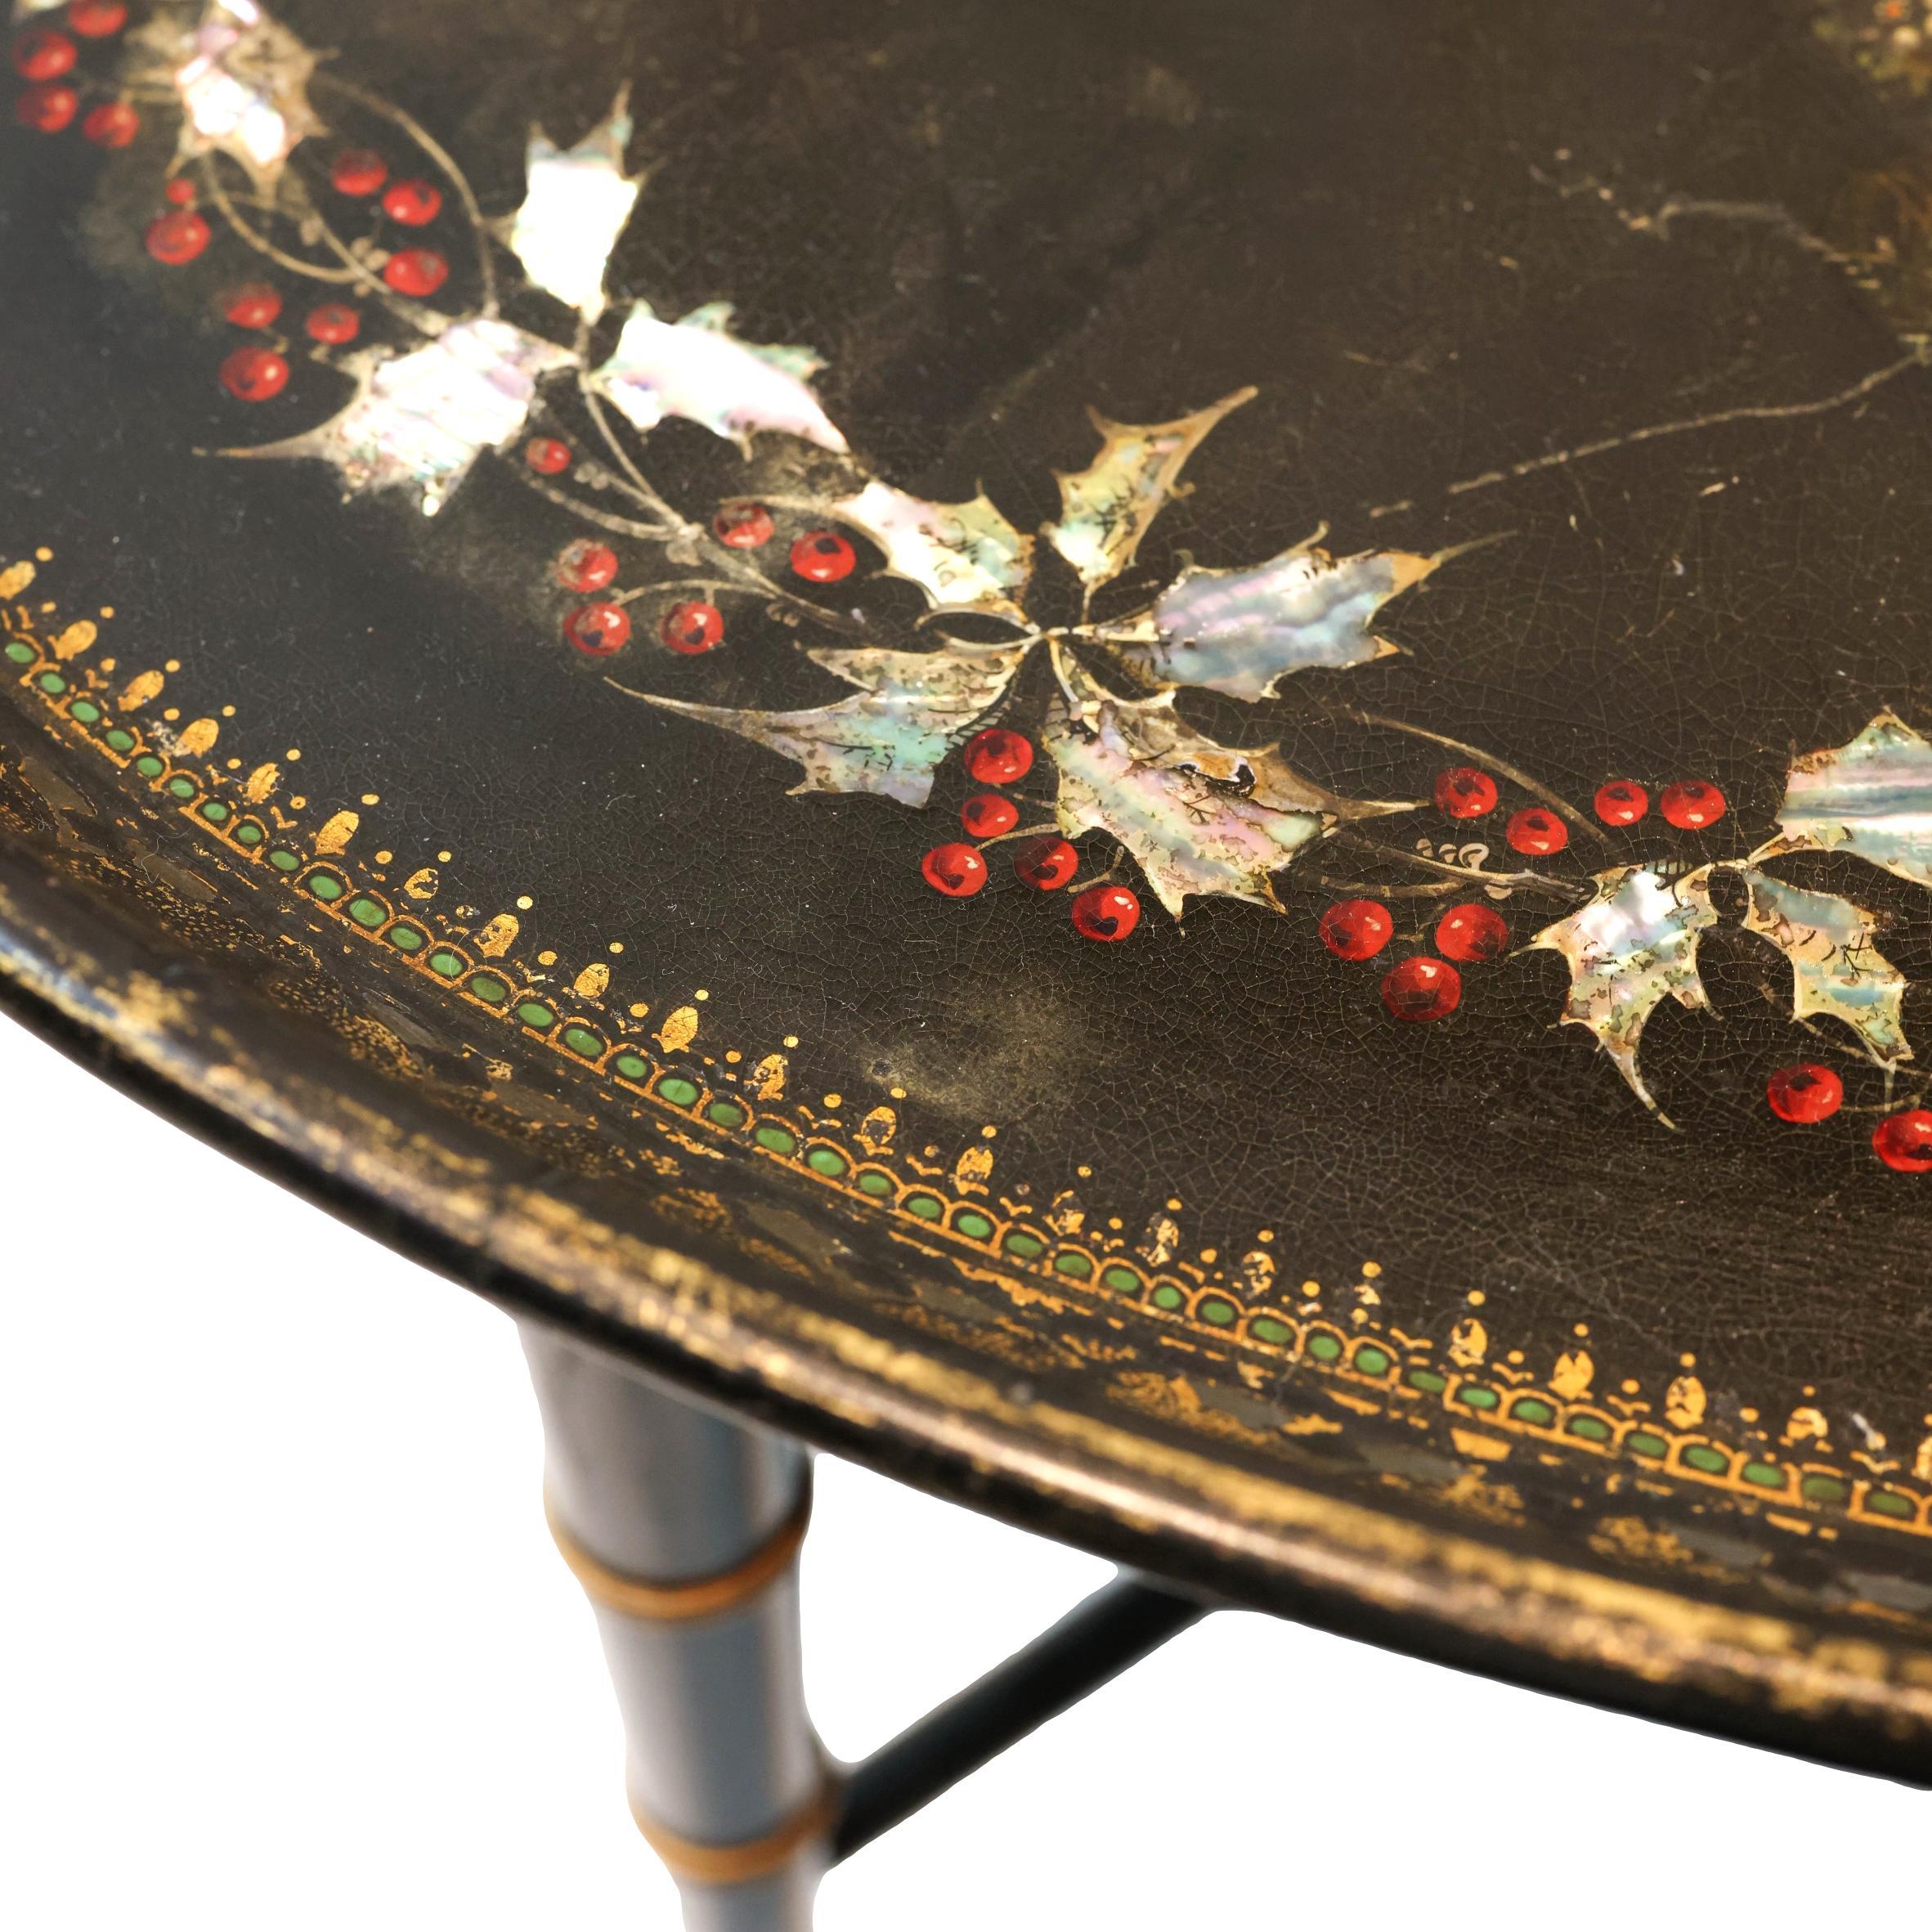 Mother-of-Pearl Inlaid and Ebonized Paper Mache Tray Table, English, ca. 1850 For Sale 4